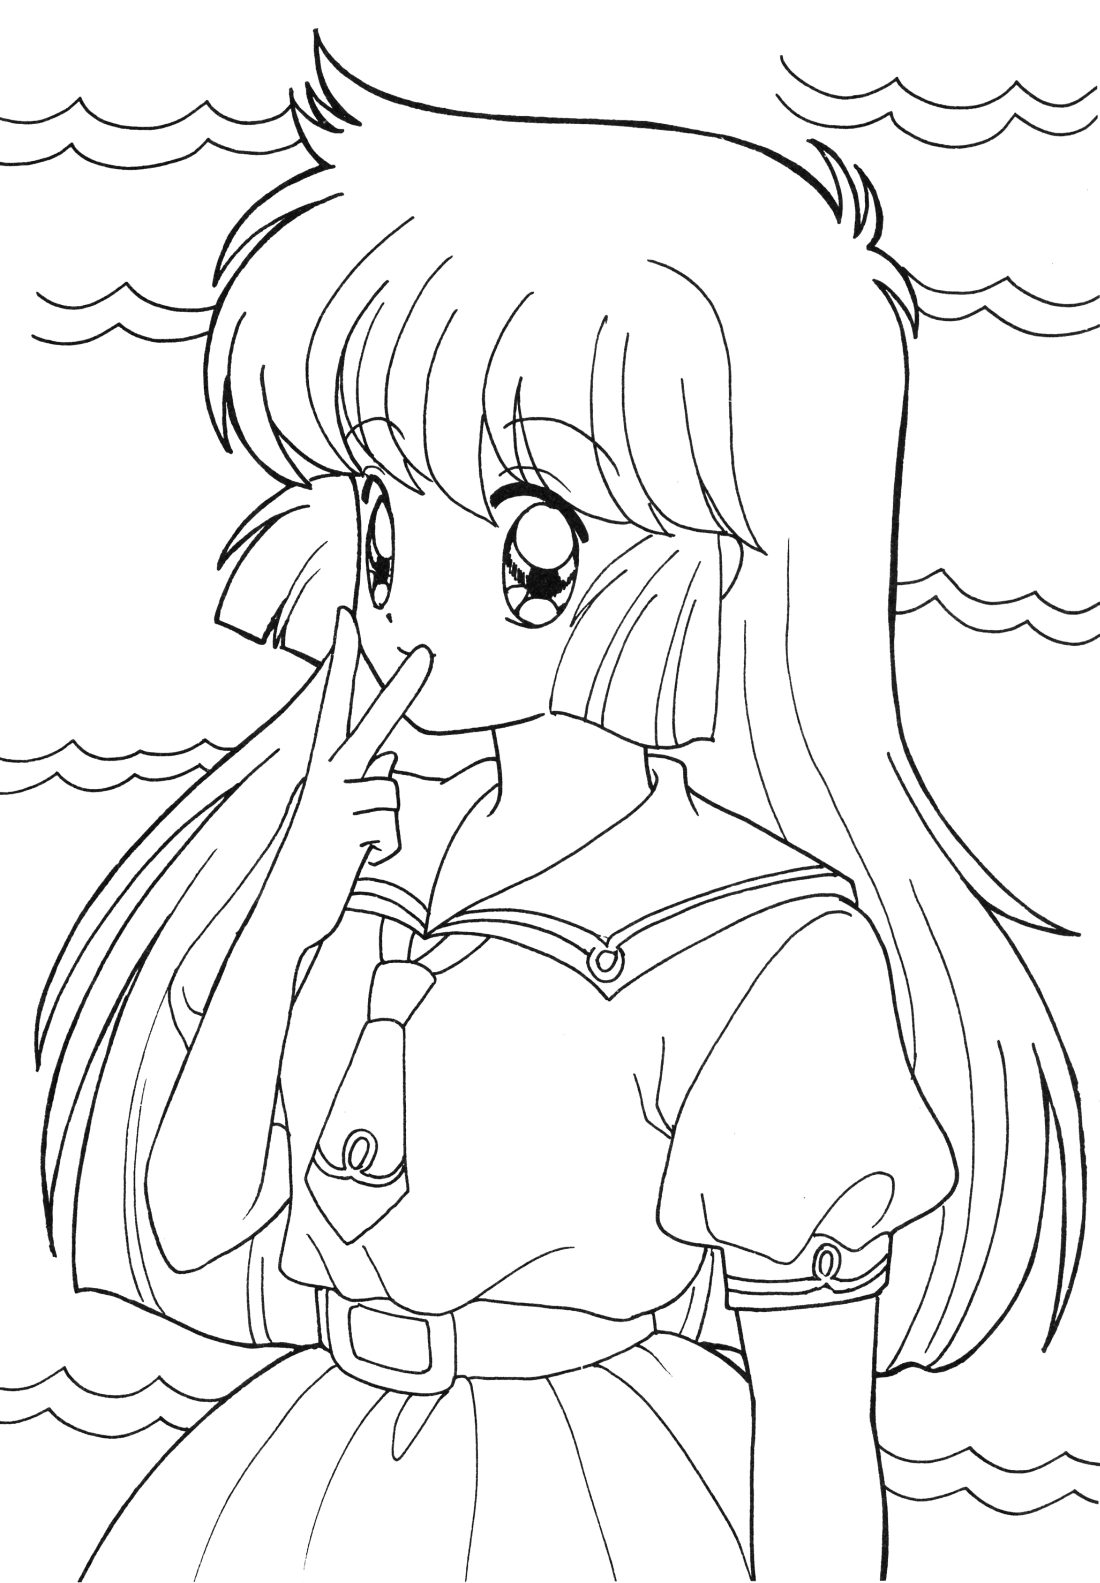  Anime Coloring Pages 2